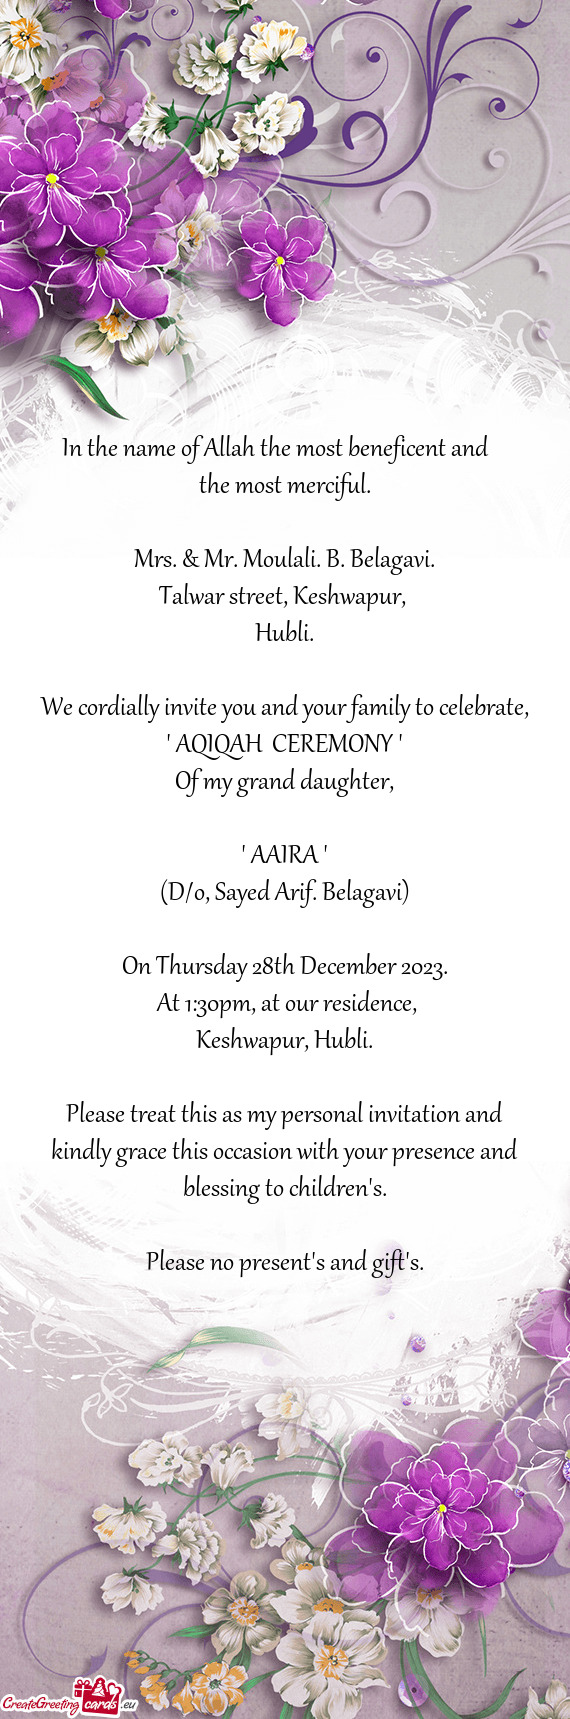 We cordially invite you and your family to celebrate